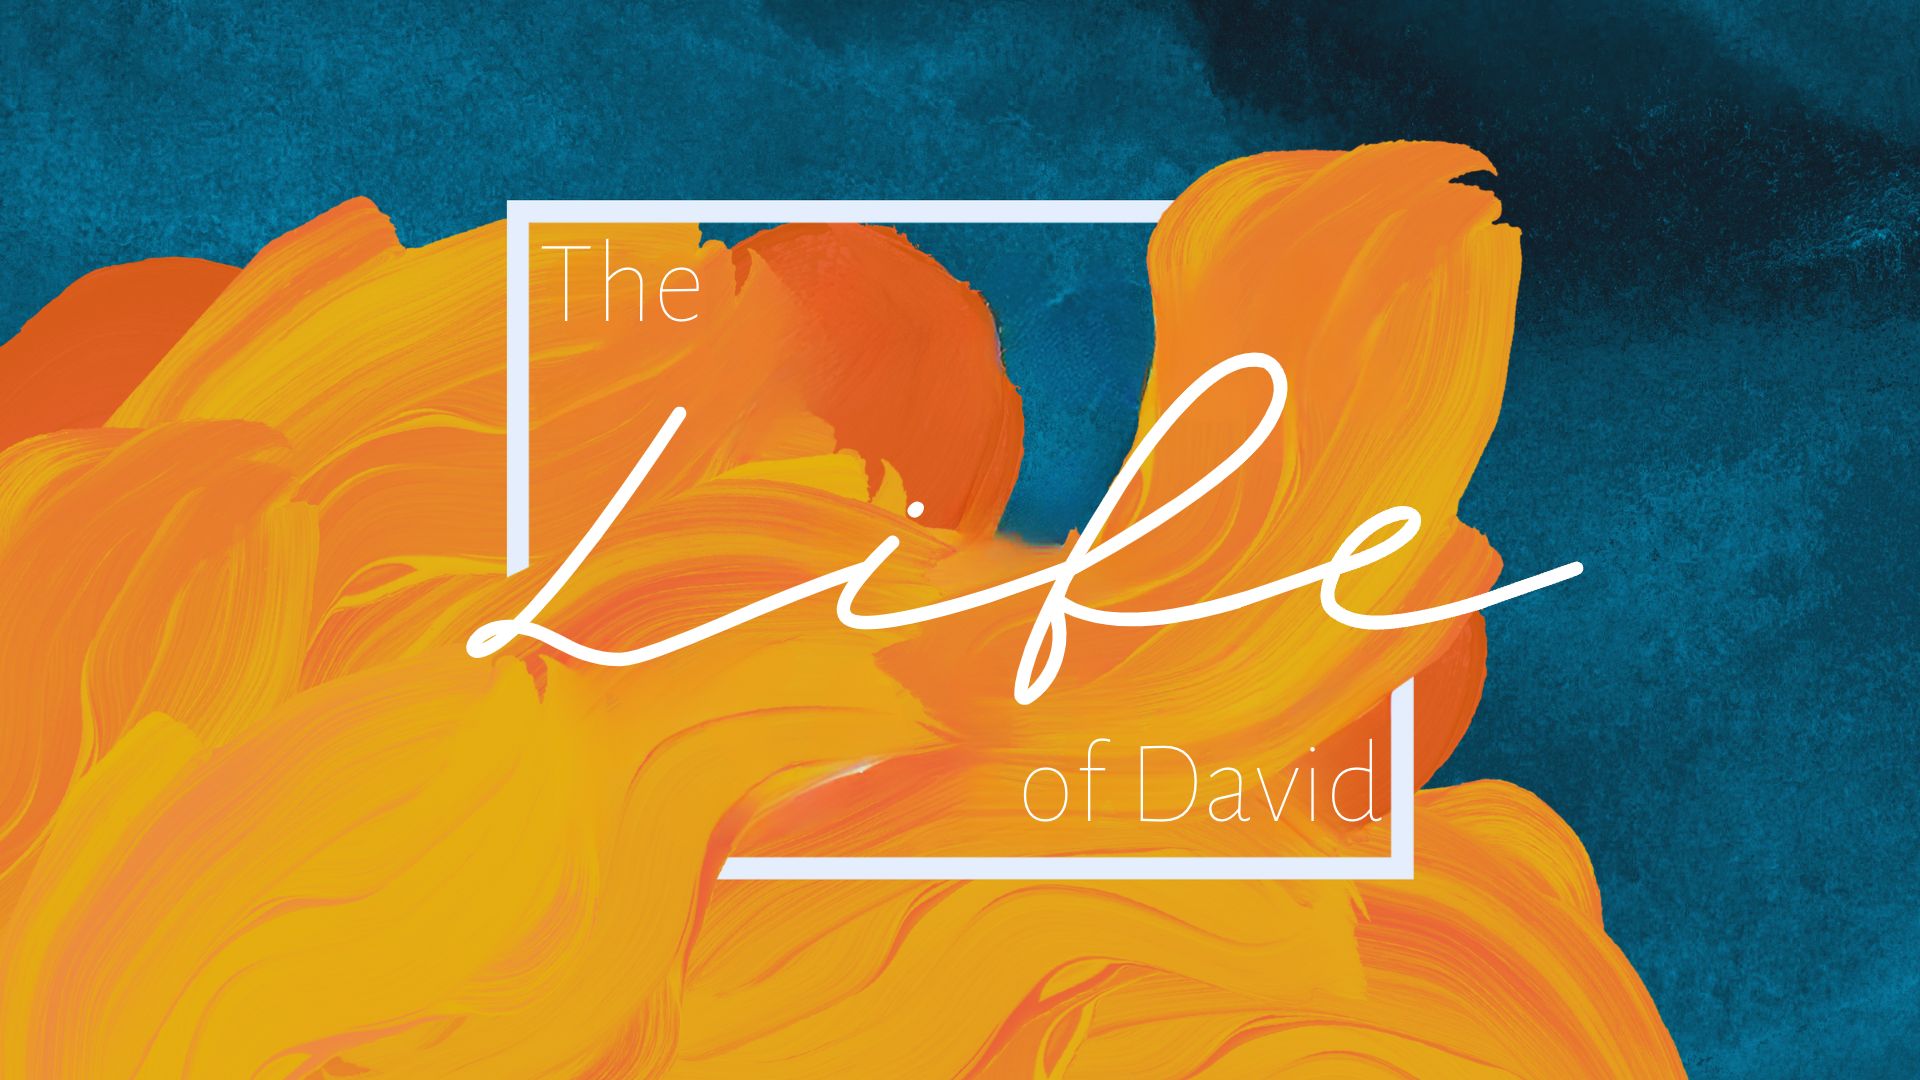 The Life of David: A Man After God’s Own Heart